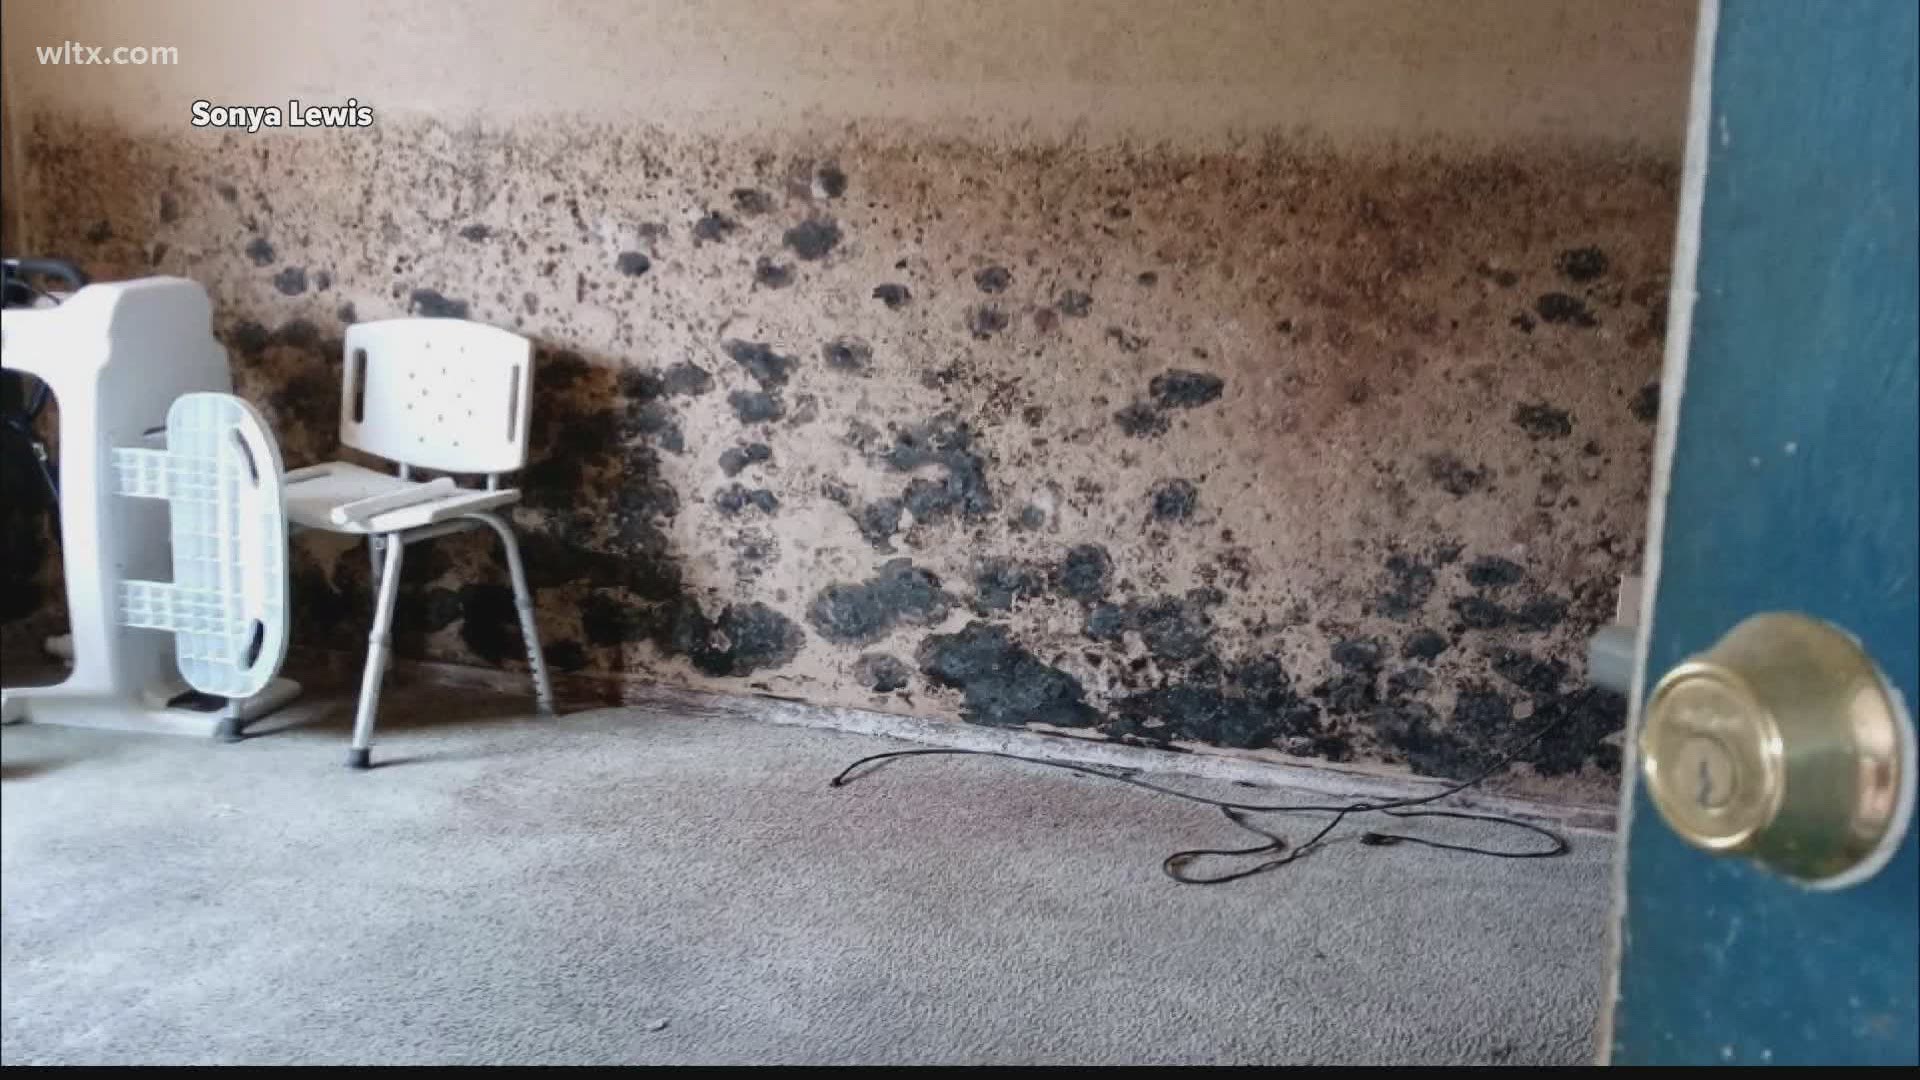 Residents at Hillandale Apartments say the units have mold, rodents and filth. This comes just two weeks after a fire at the complex displaced six tenants.